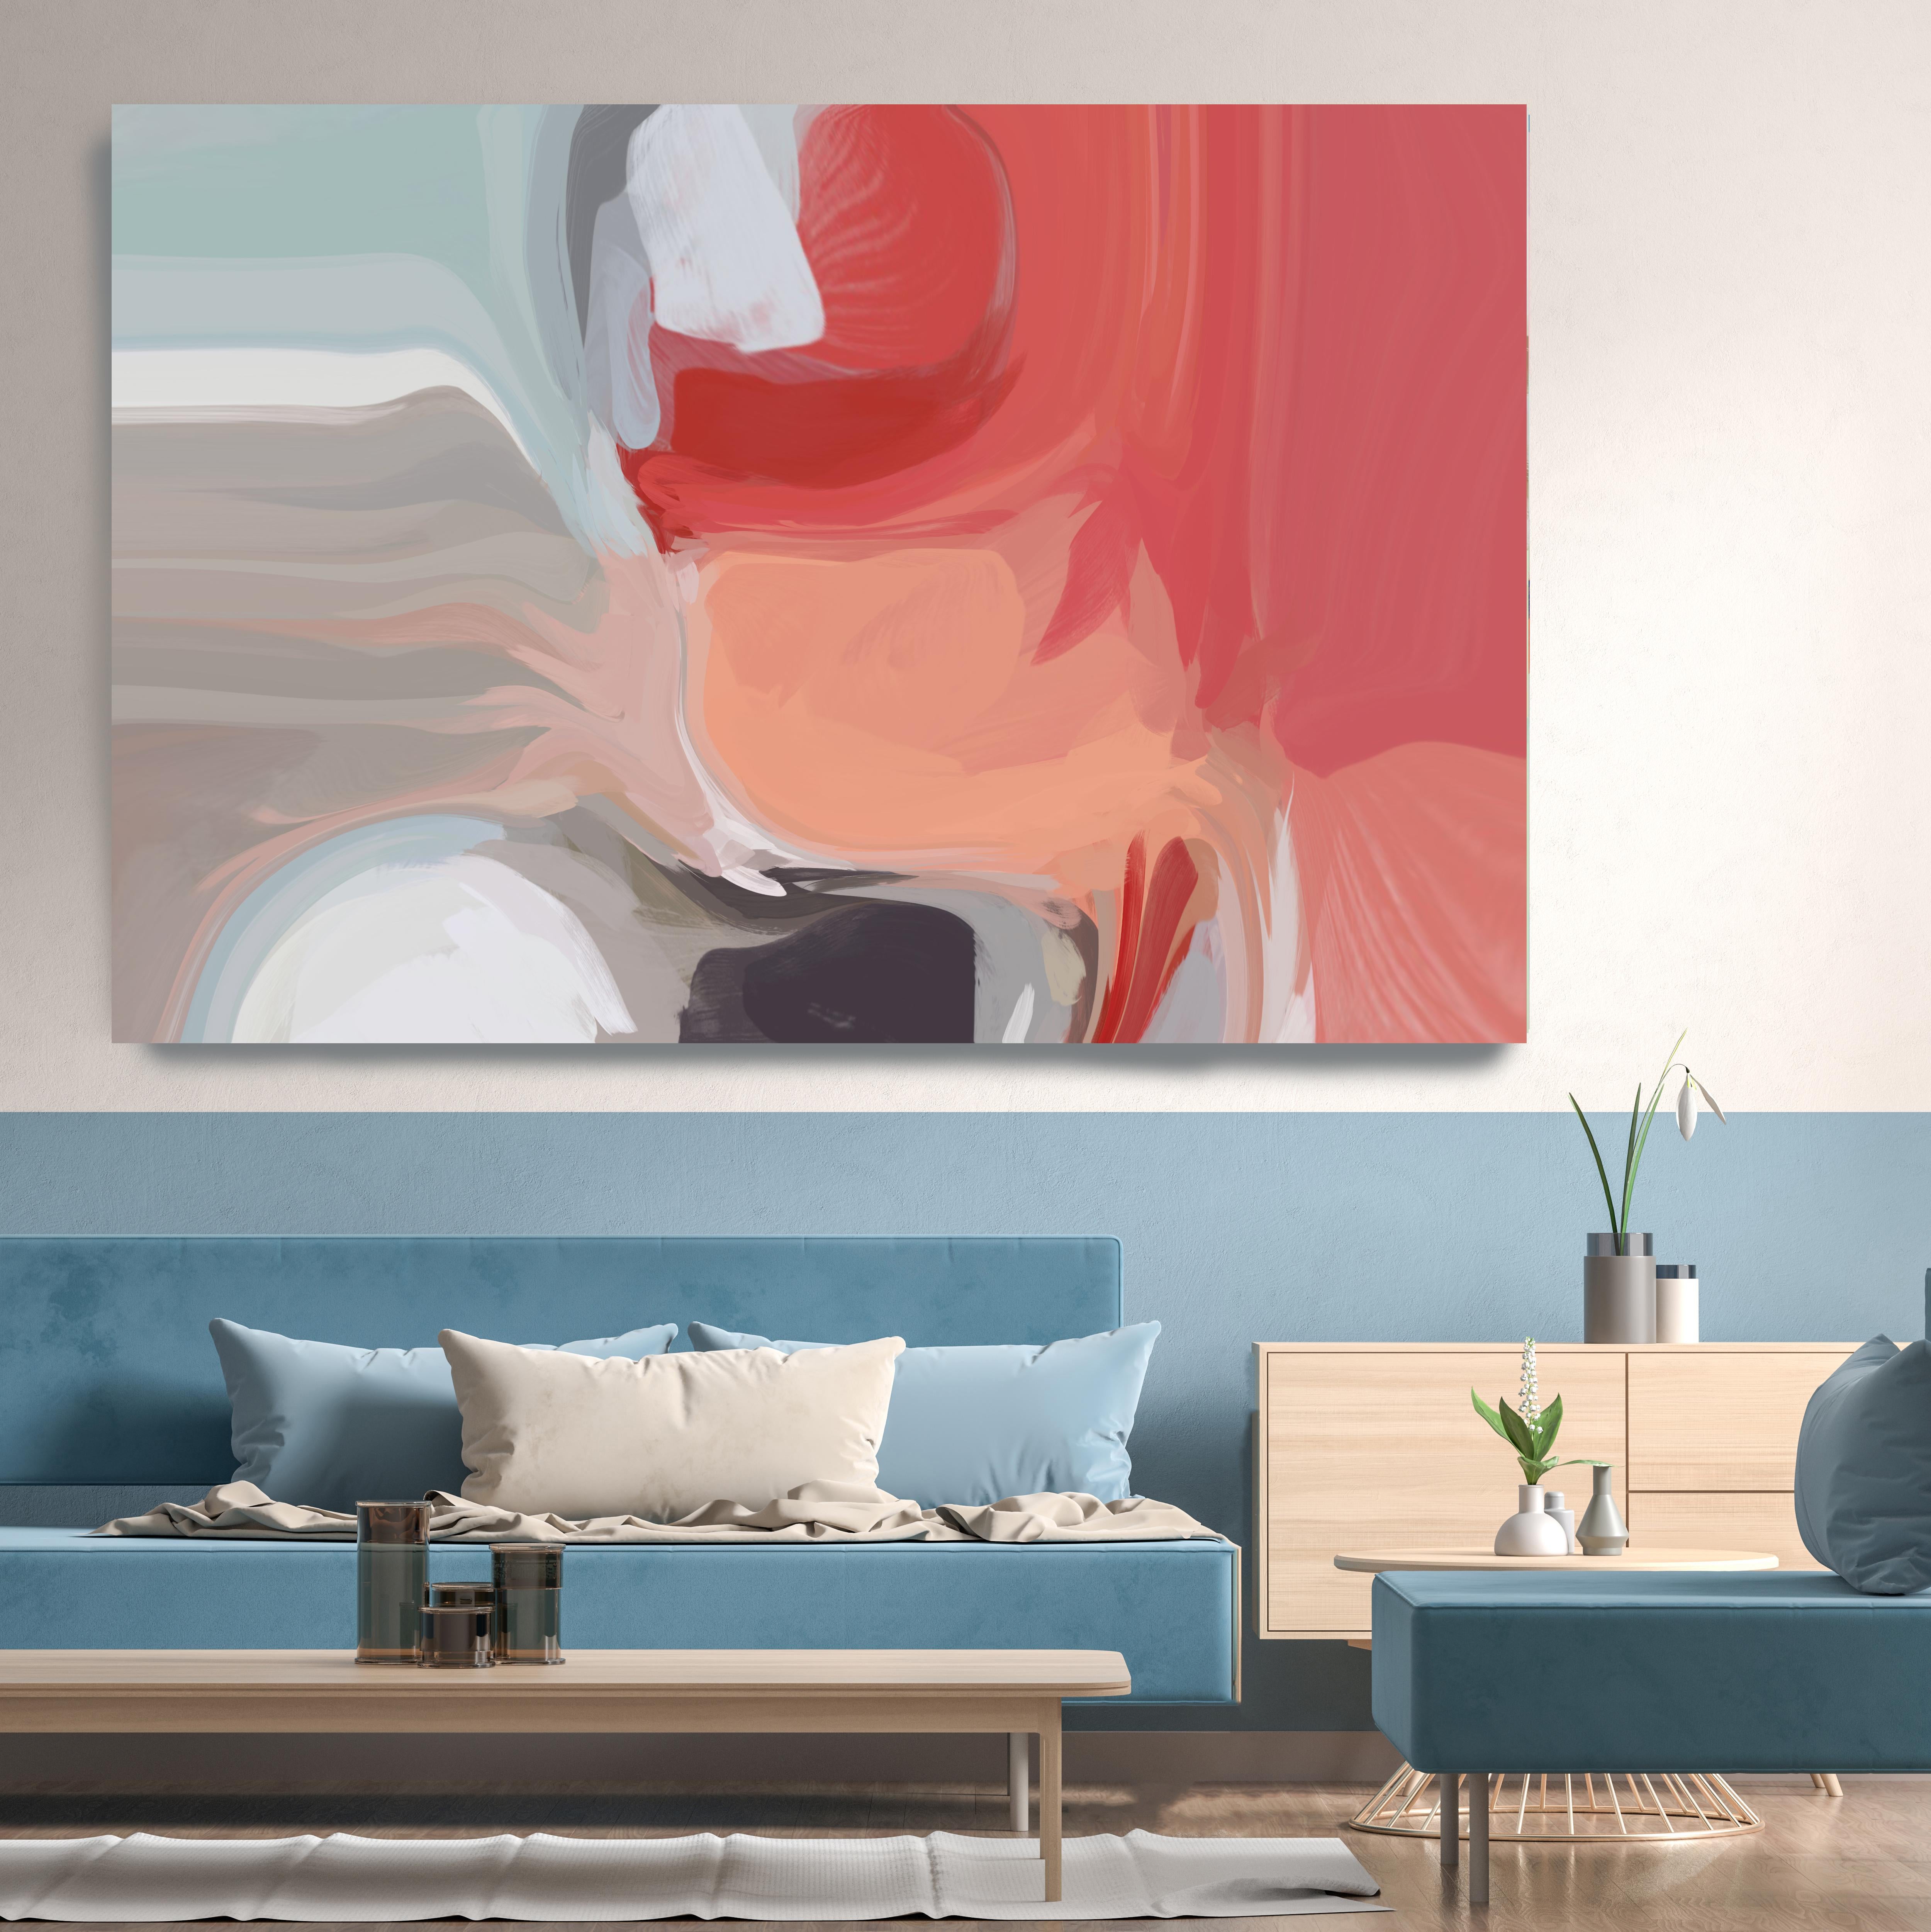 Irena Orlov Interior Painting - Coral Red Contemporary Flow Painting Mixed Media Canvas 38x56" Moment